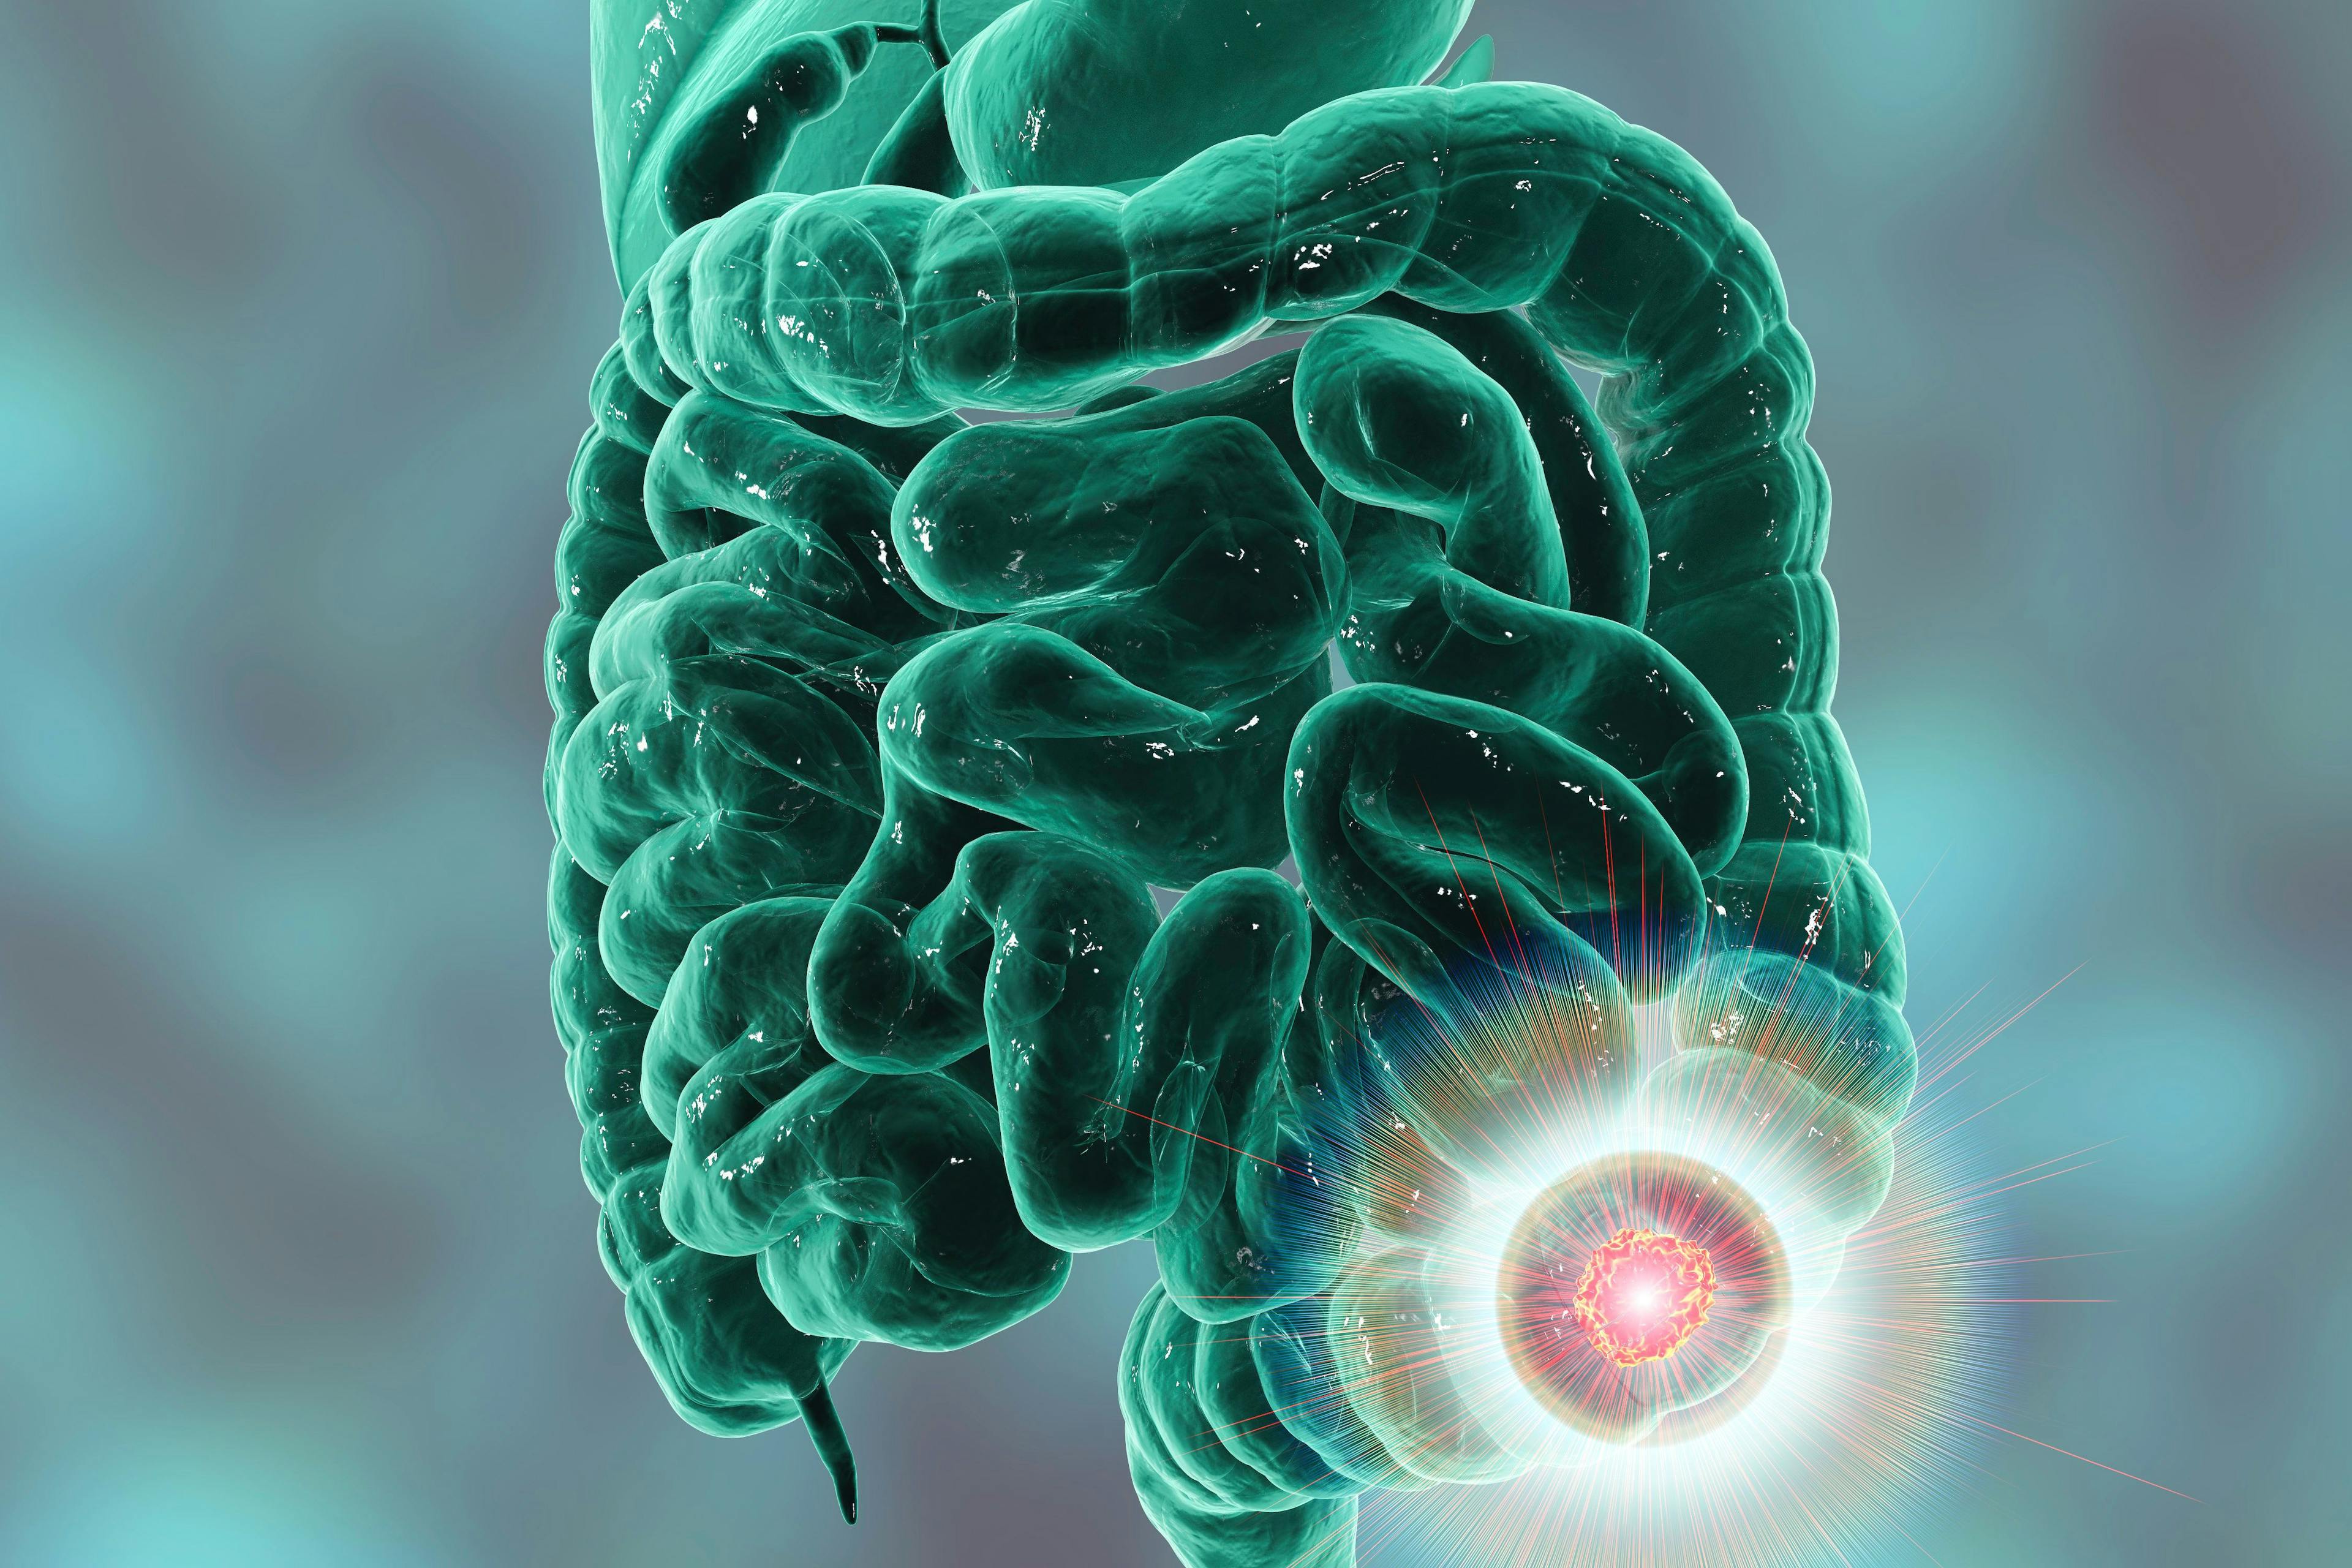 colorectal cancer | Image credit: Dr_Microbe - stock.adobe.com